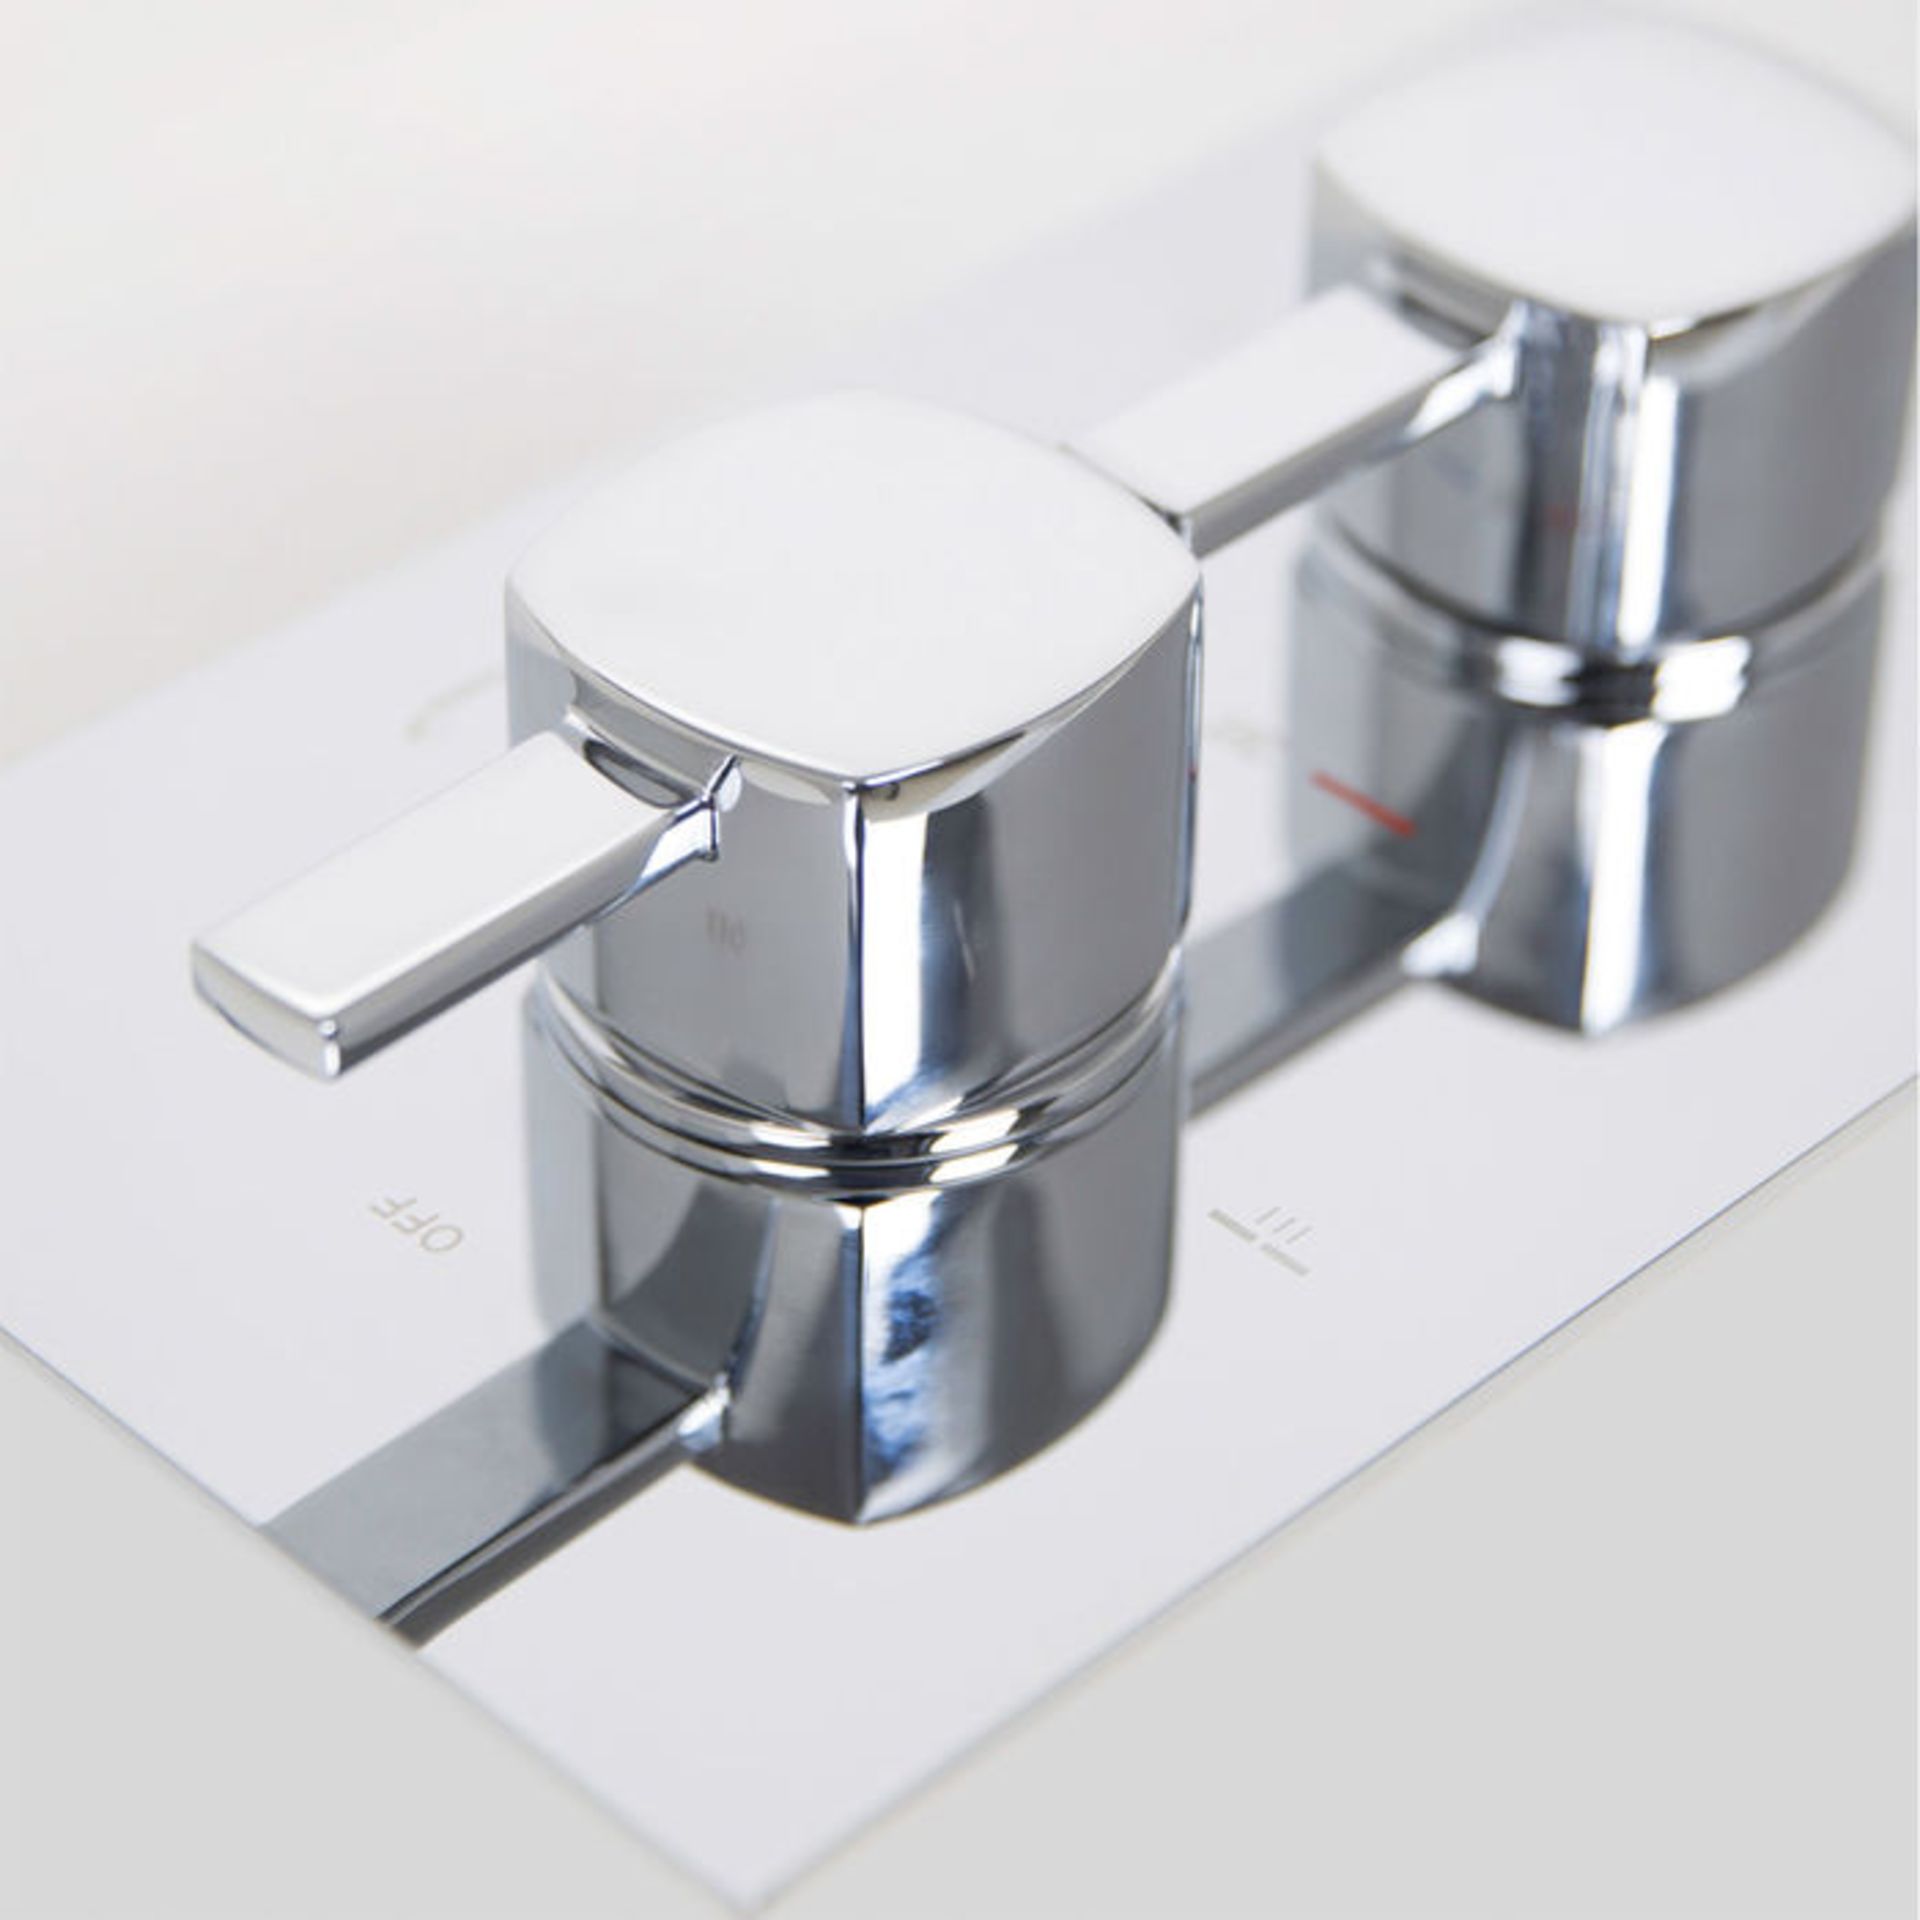 (ZZ149) Square Two Way Concealed Mixer Valve. - Image 2 of 2